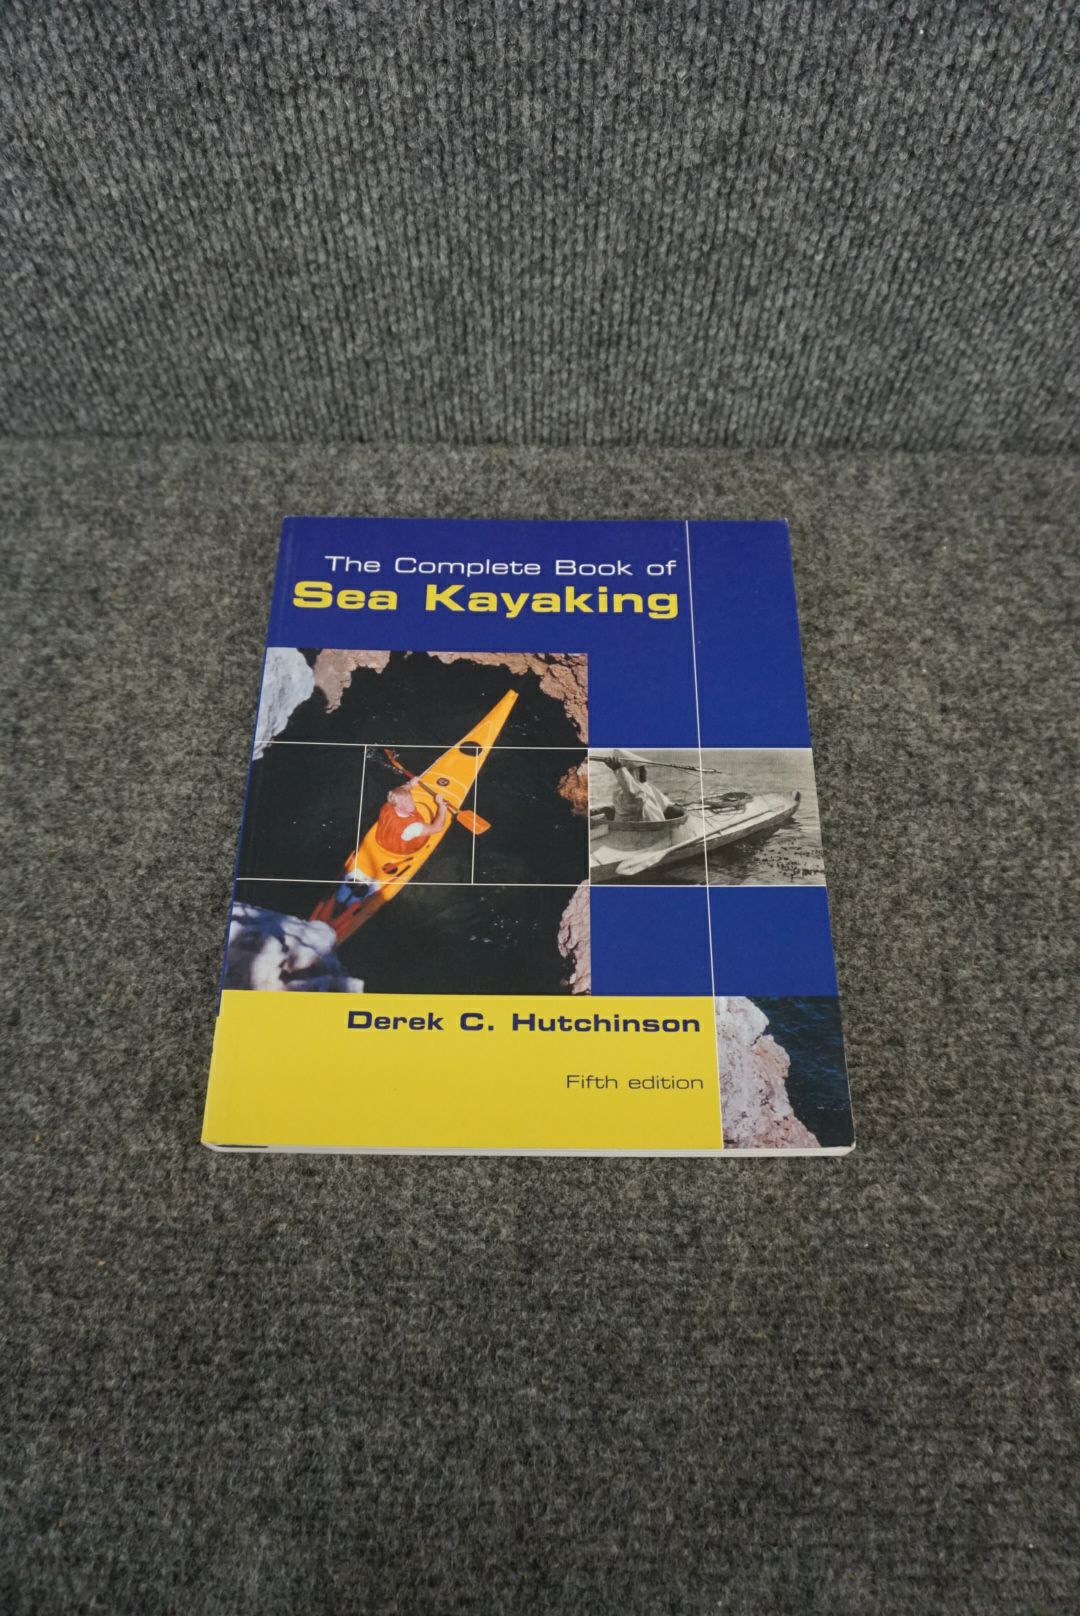 The complete Book of Sea Kayaking